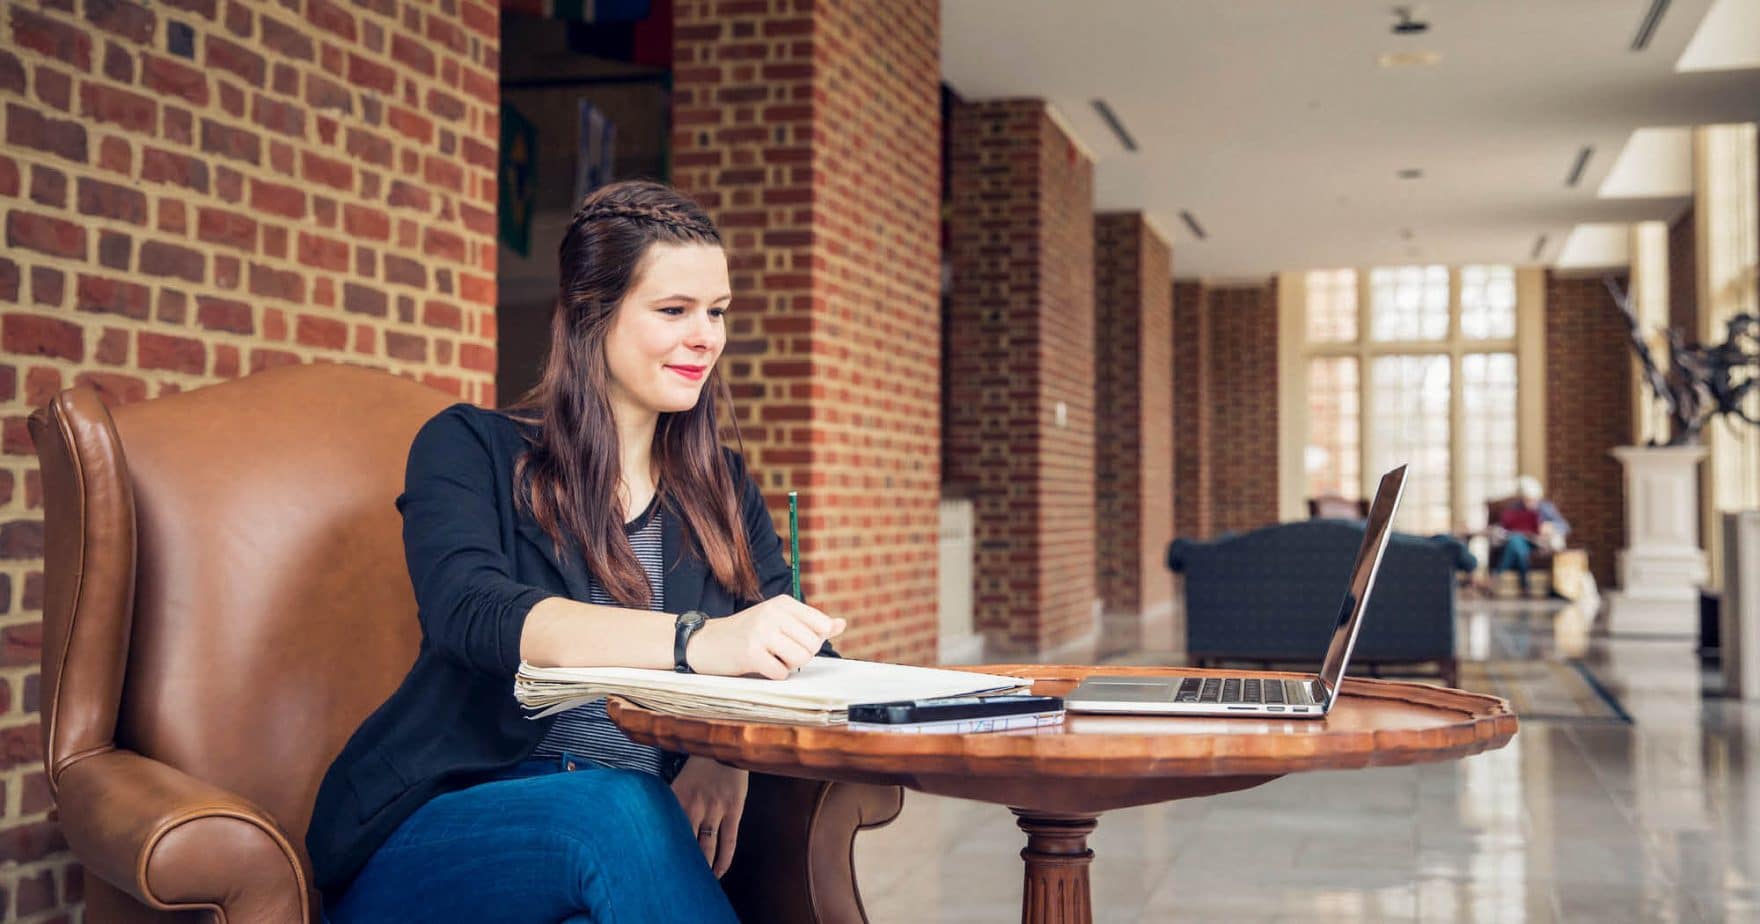 A student at Regent University, Virginia Beach: Learn what colleges look for.